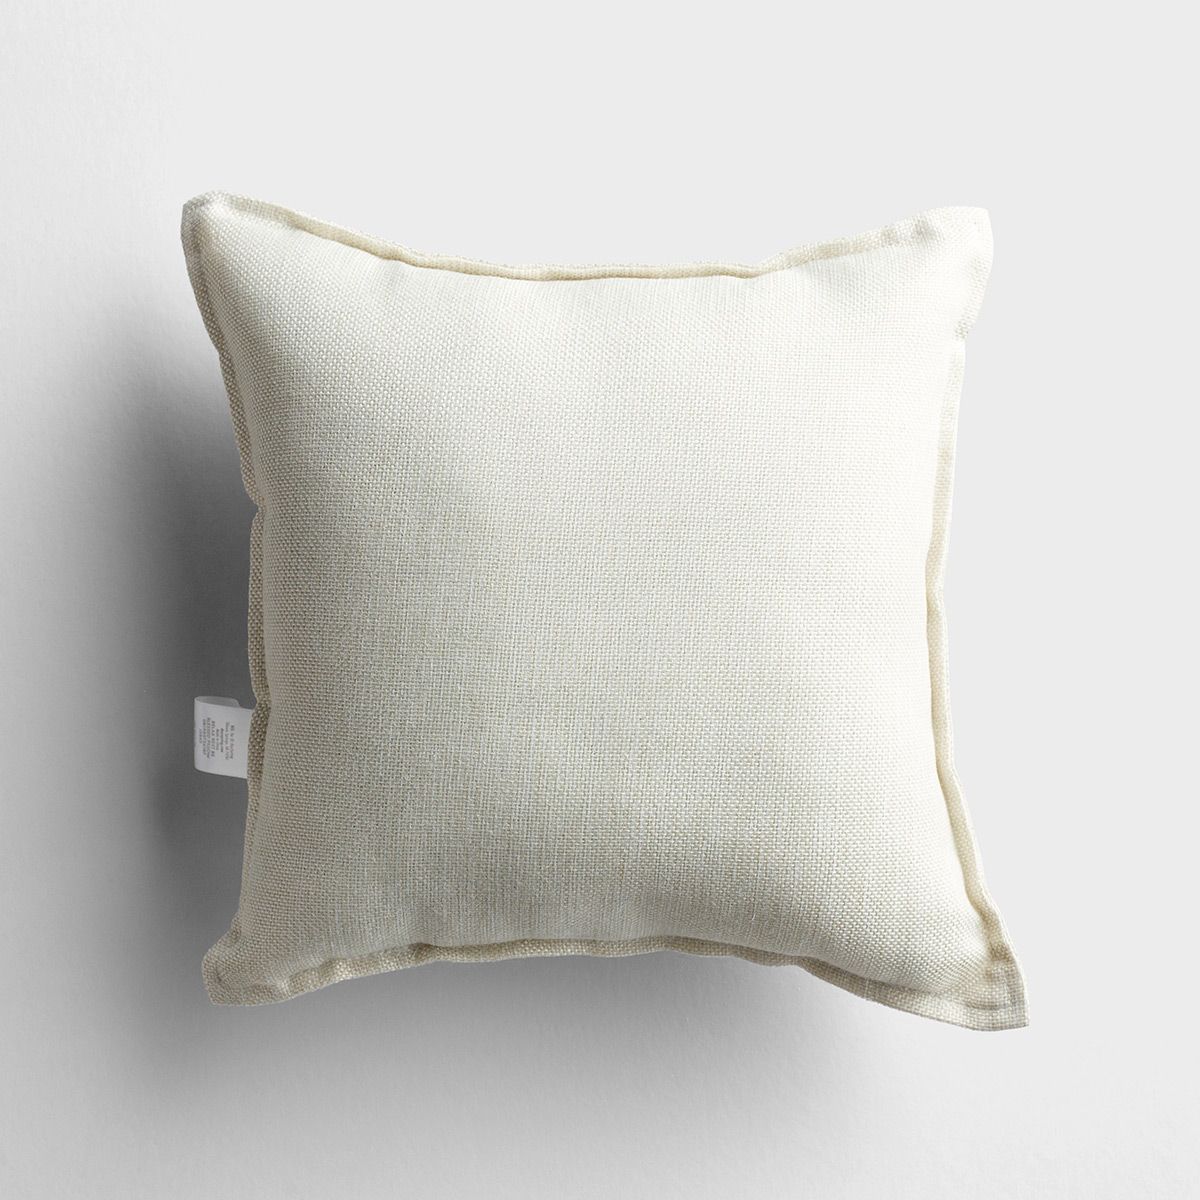 Relax, Rest, Be Blessed - Small Throw Pillow - The Christian Gift Company